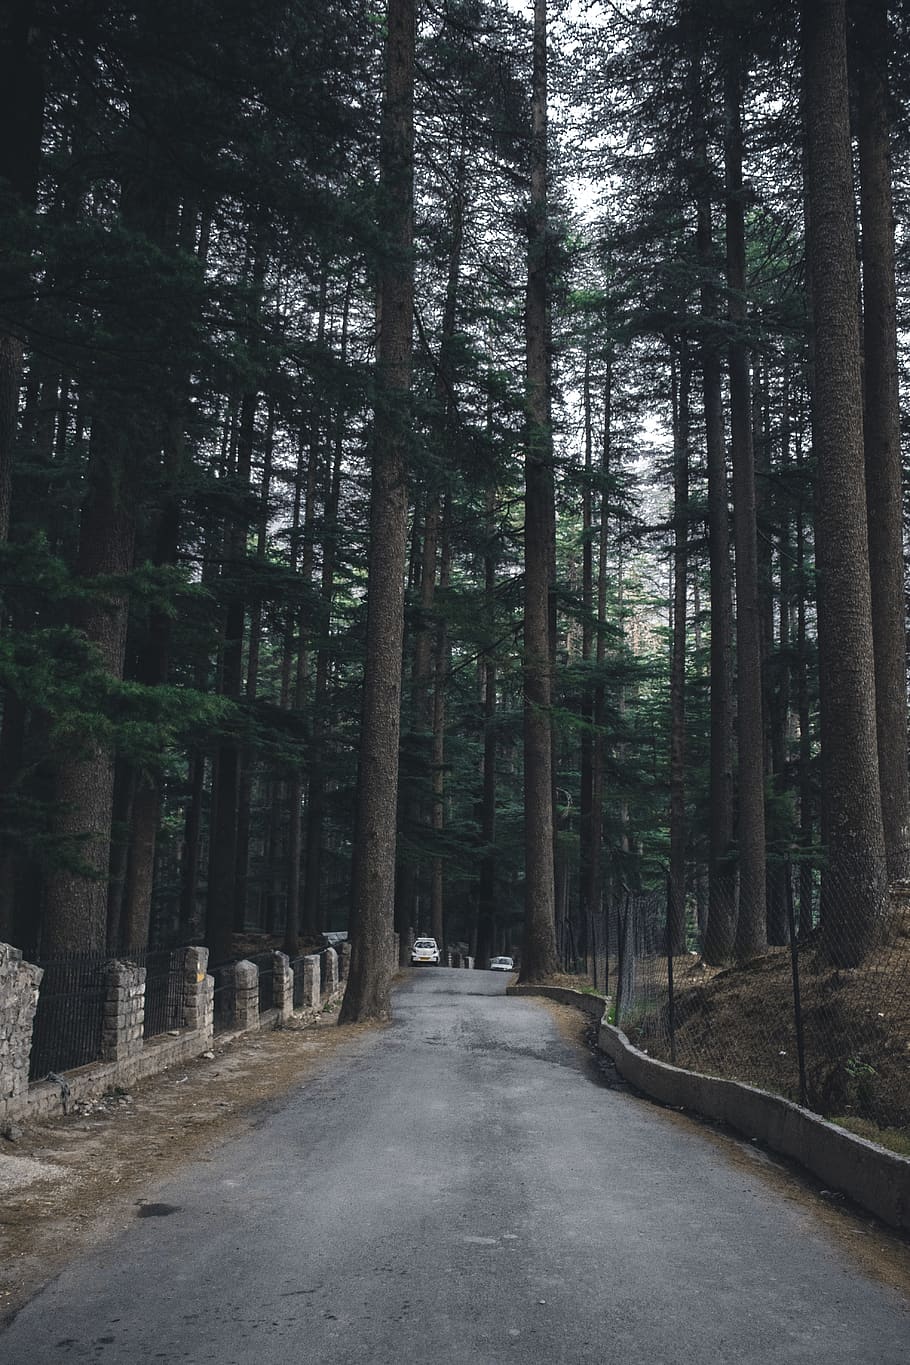 india, manali, trees, road, hill, evening, plant, direction